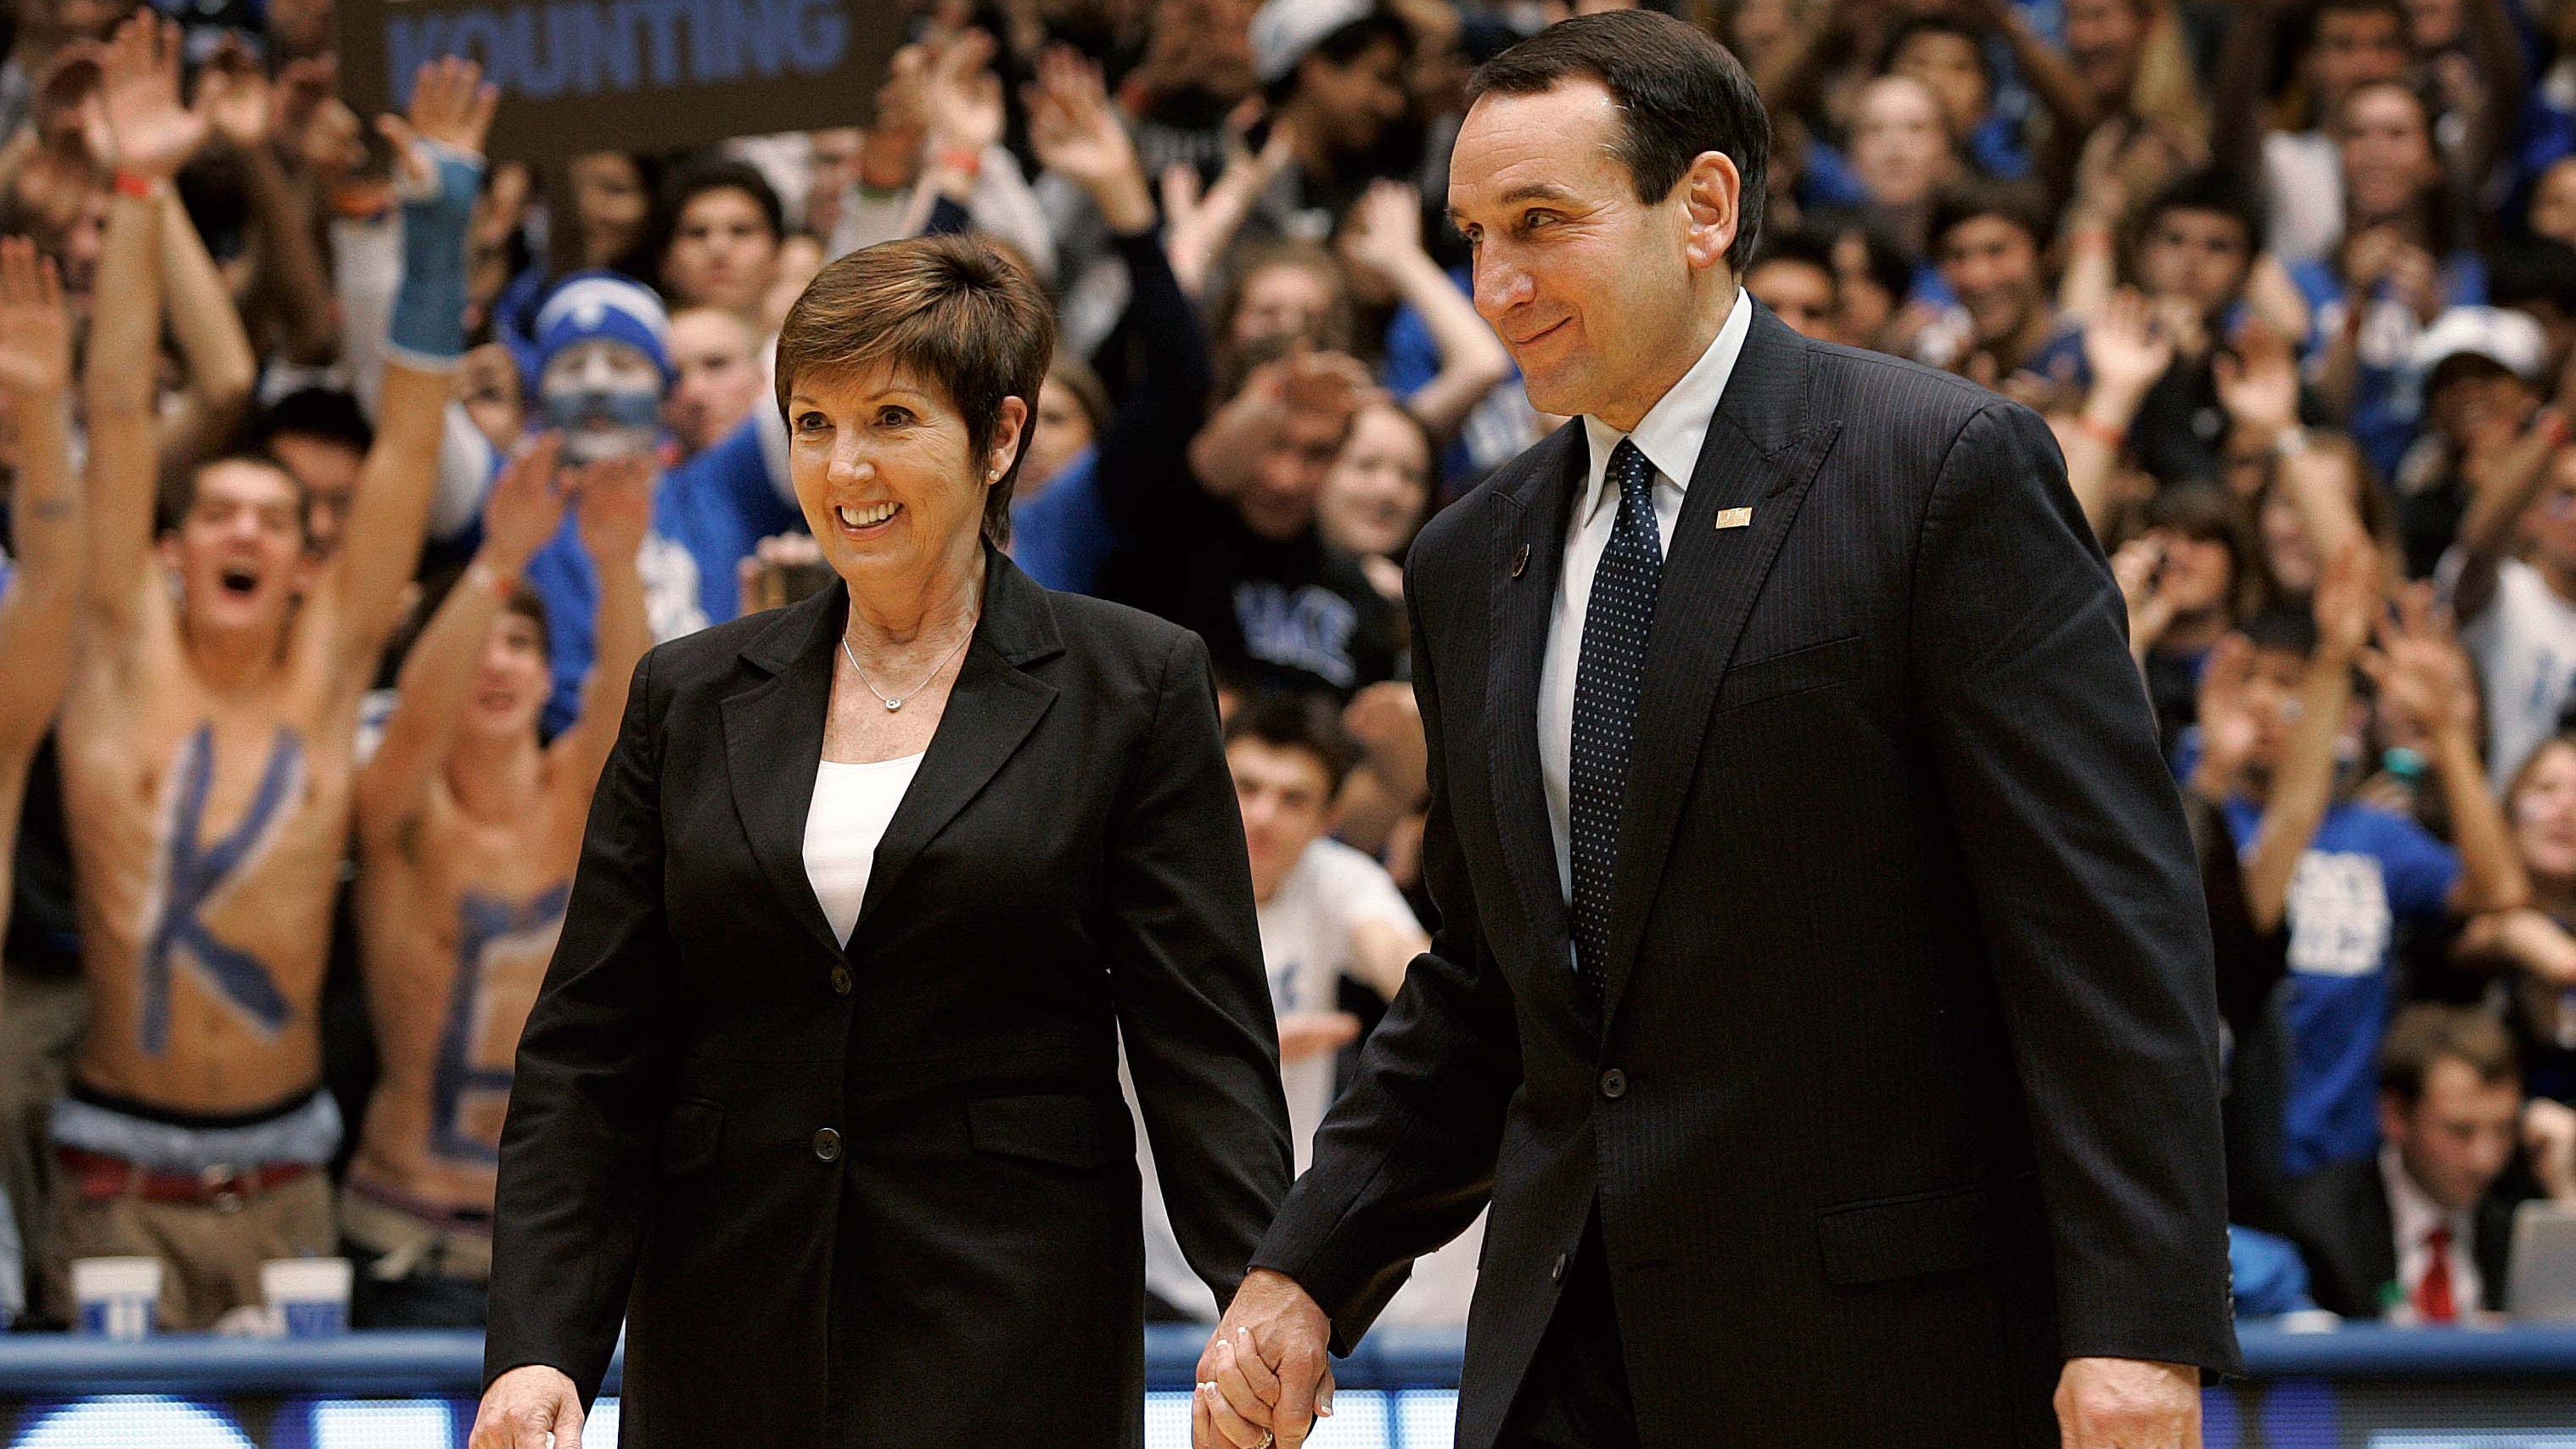 Who Is Coach K’s Wife?